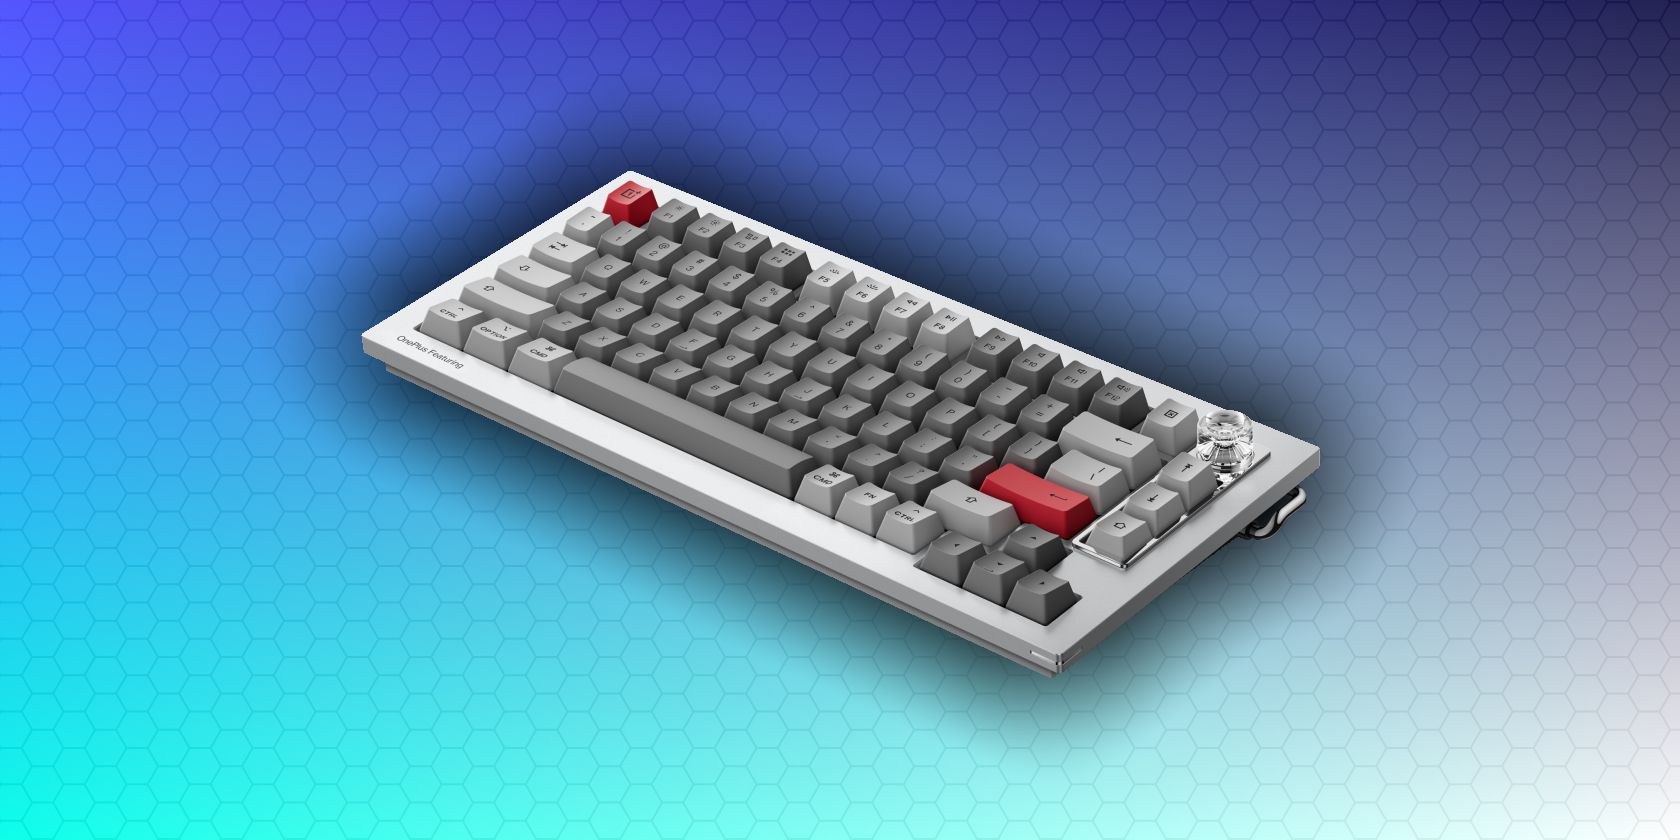 oneplus keyboard 81 plus on gradient background feature